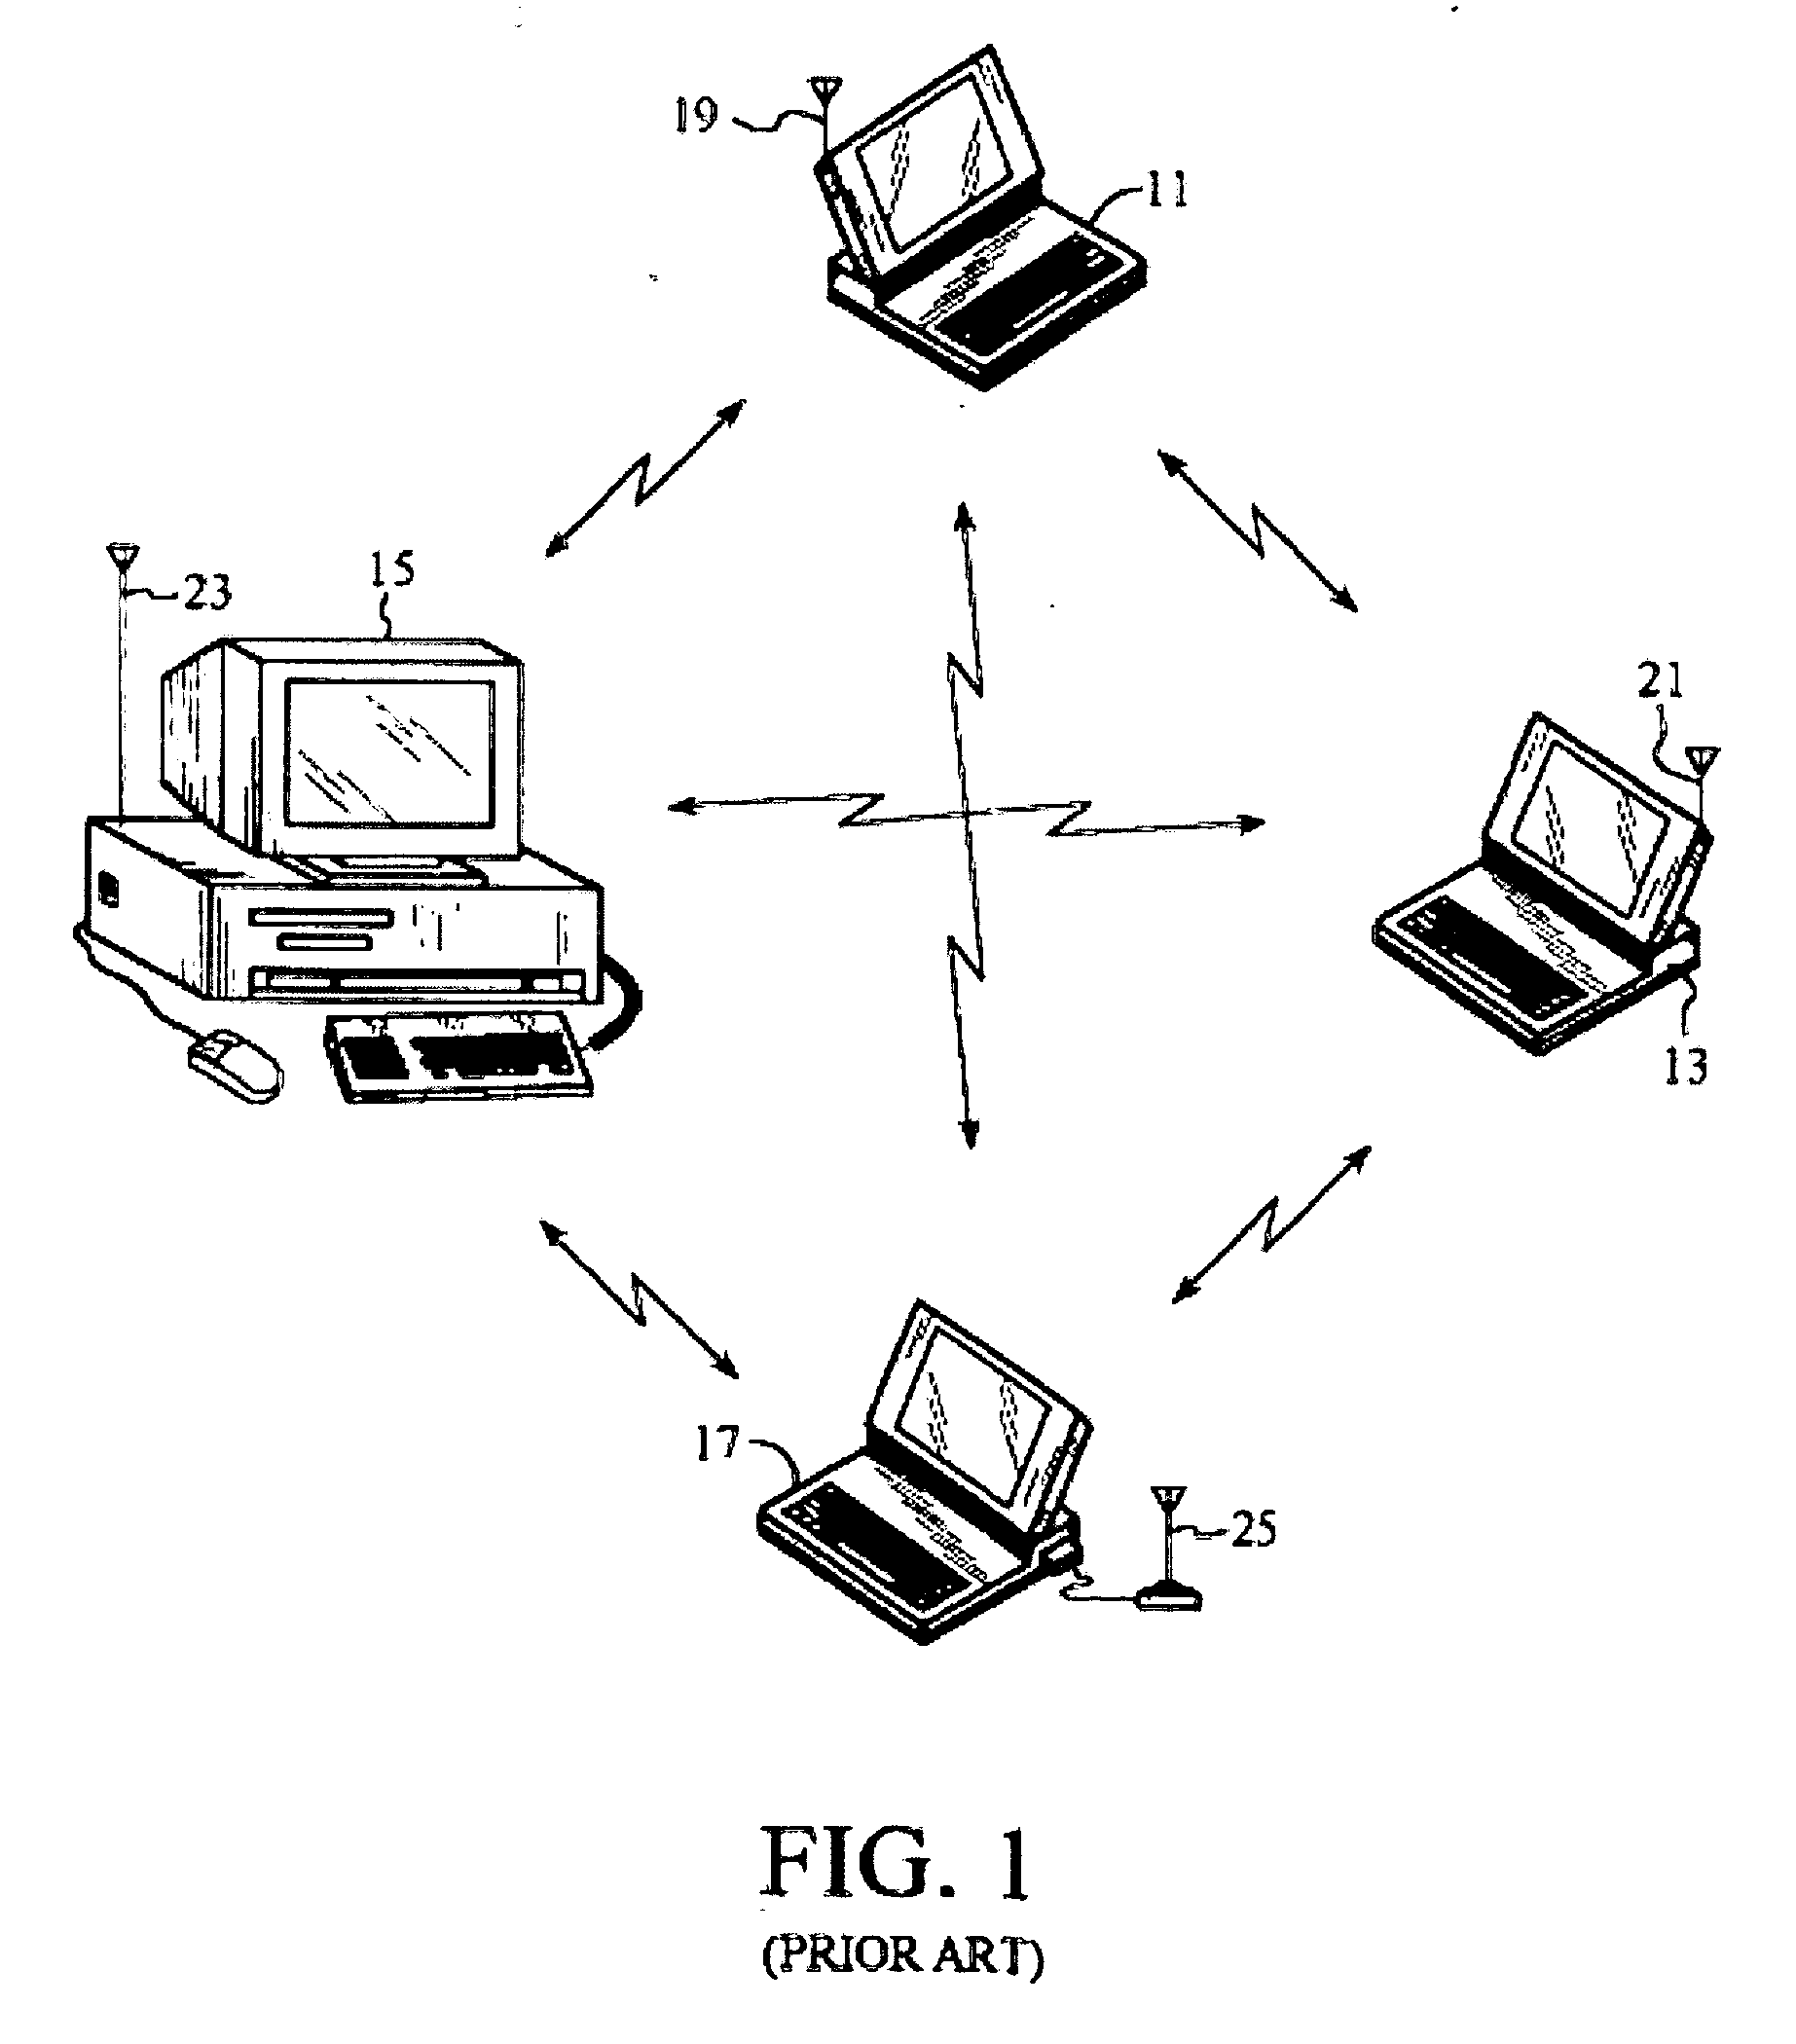 System and Method for Distributed Network Authentication and Access Control